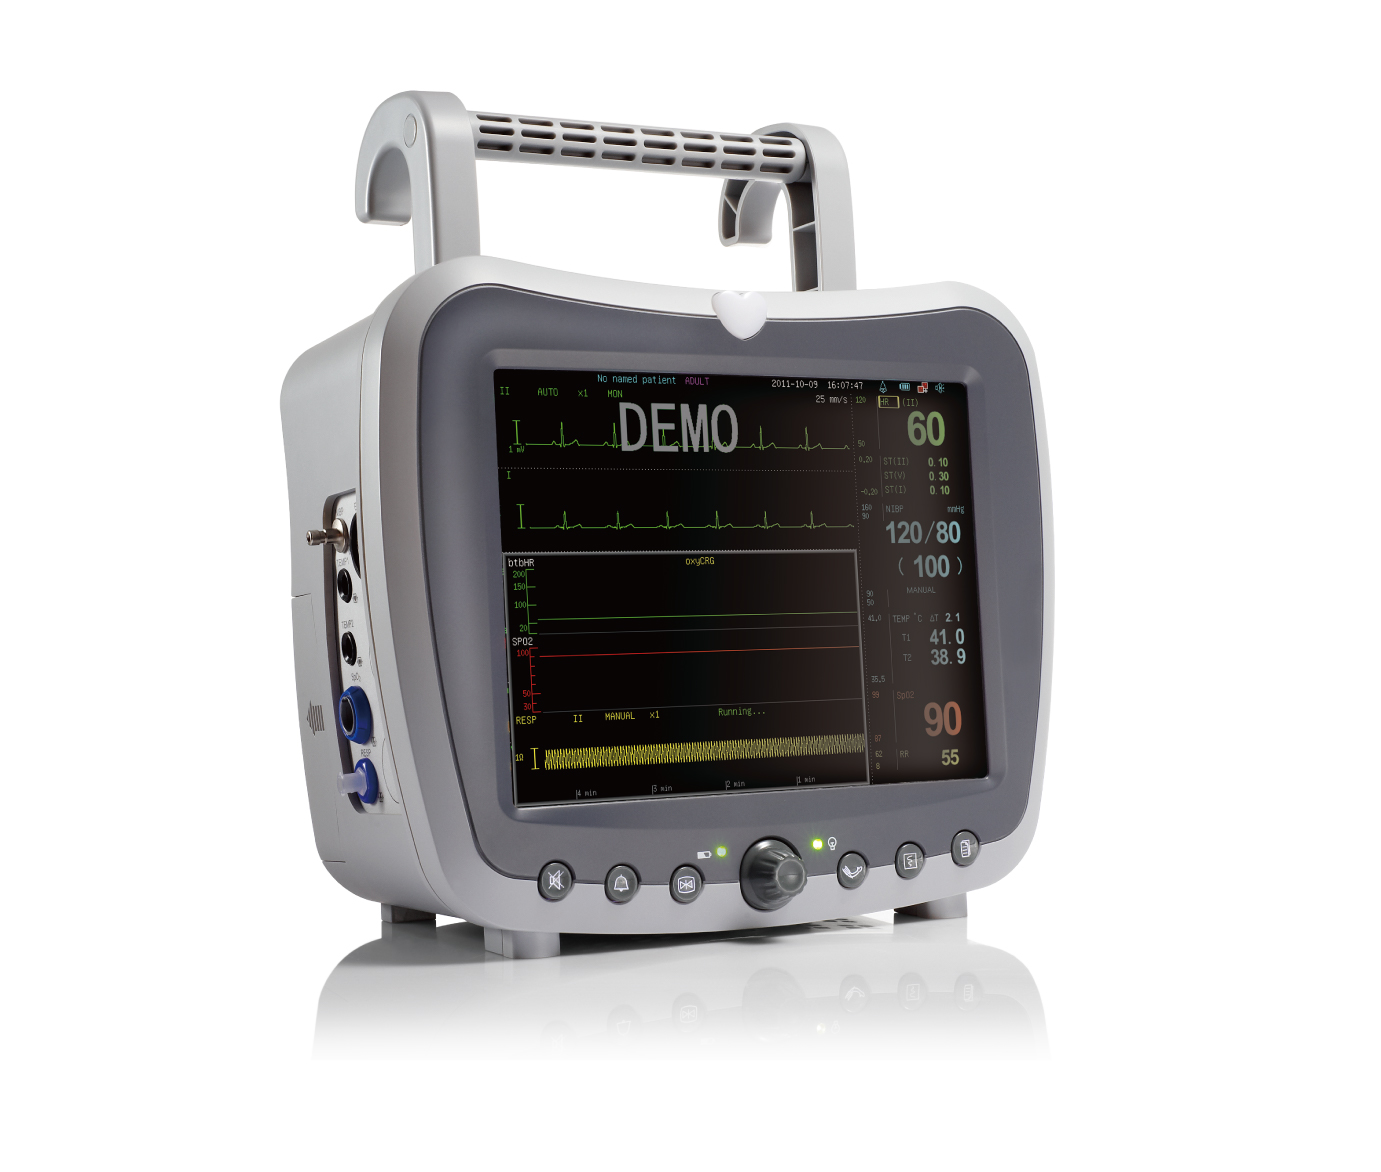 G3H patient monitor